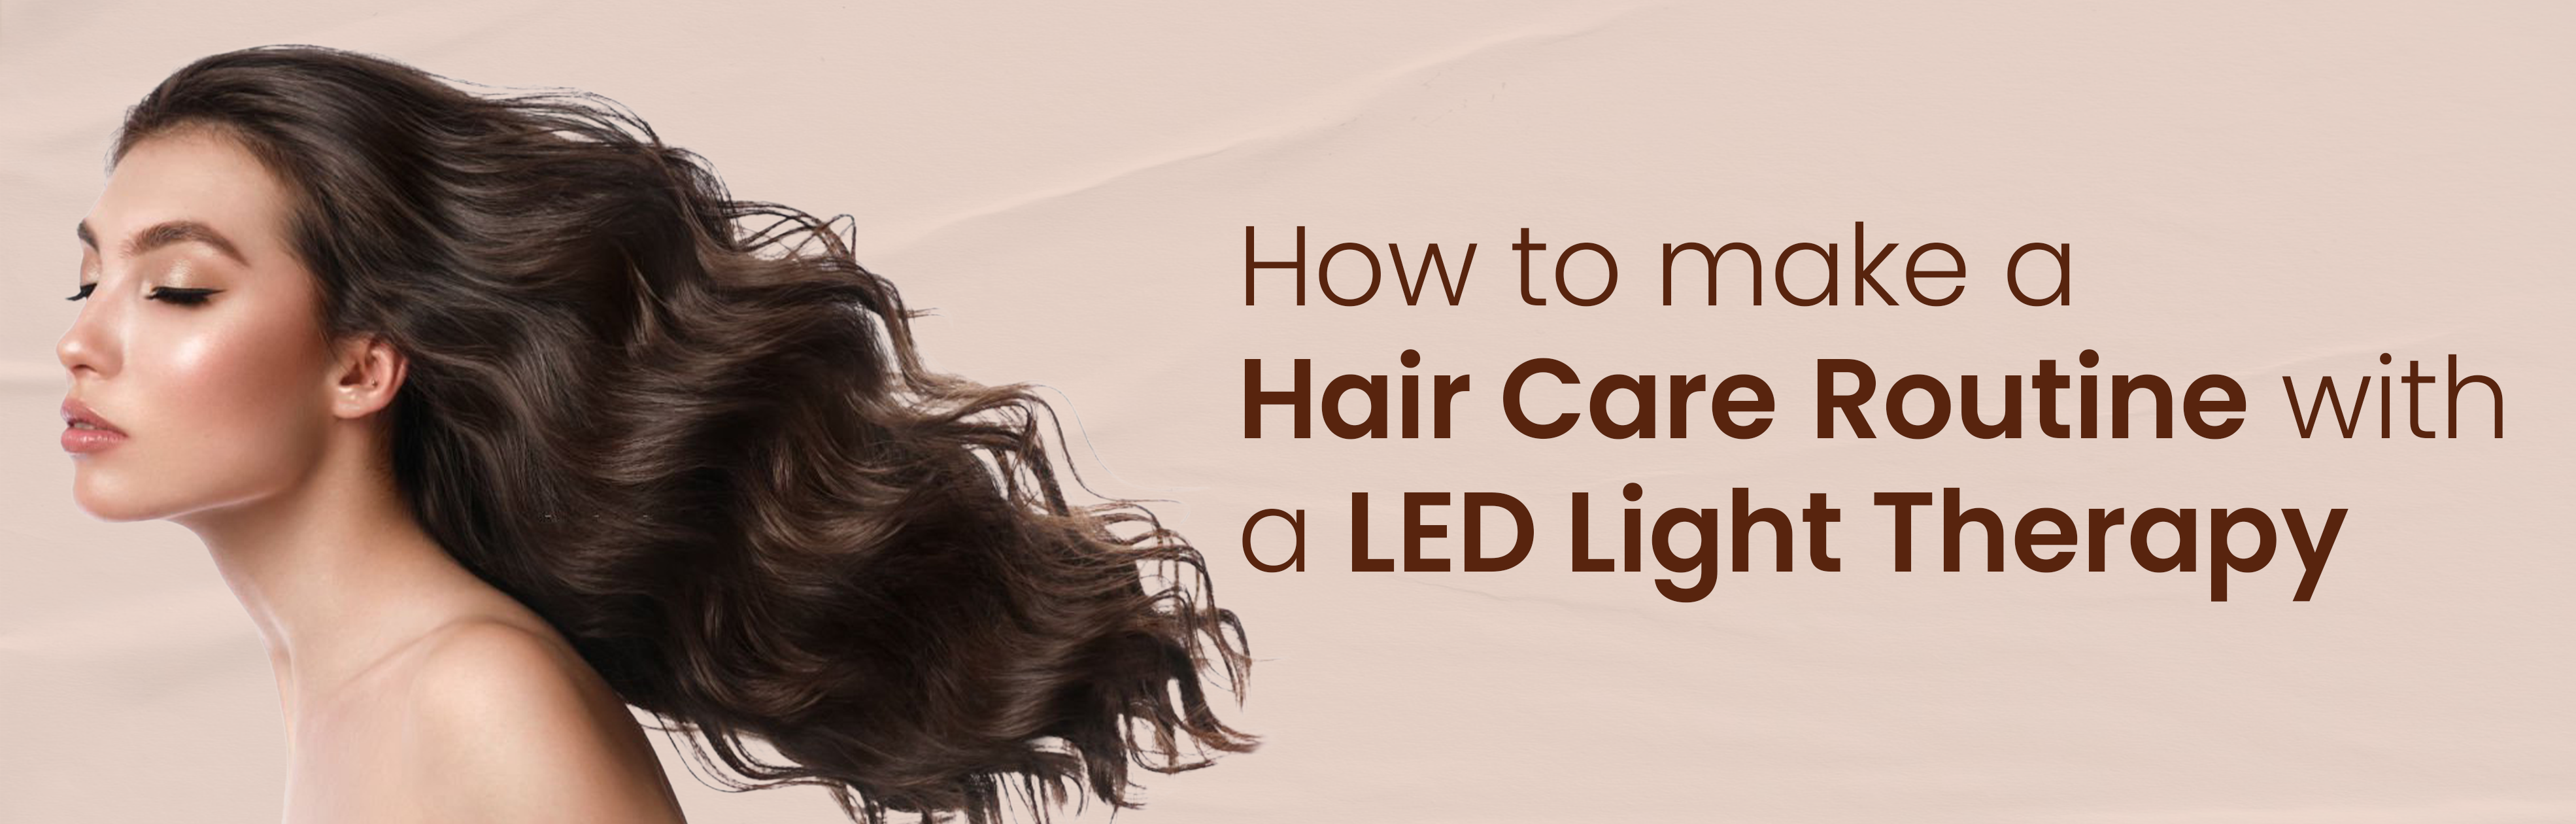 How to make a Hair Care Routine with LED light therapy?